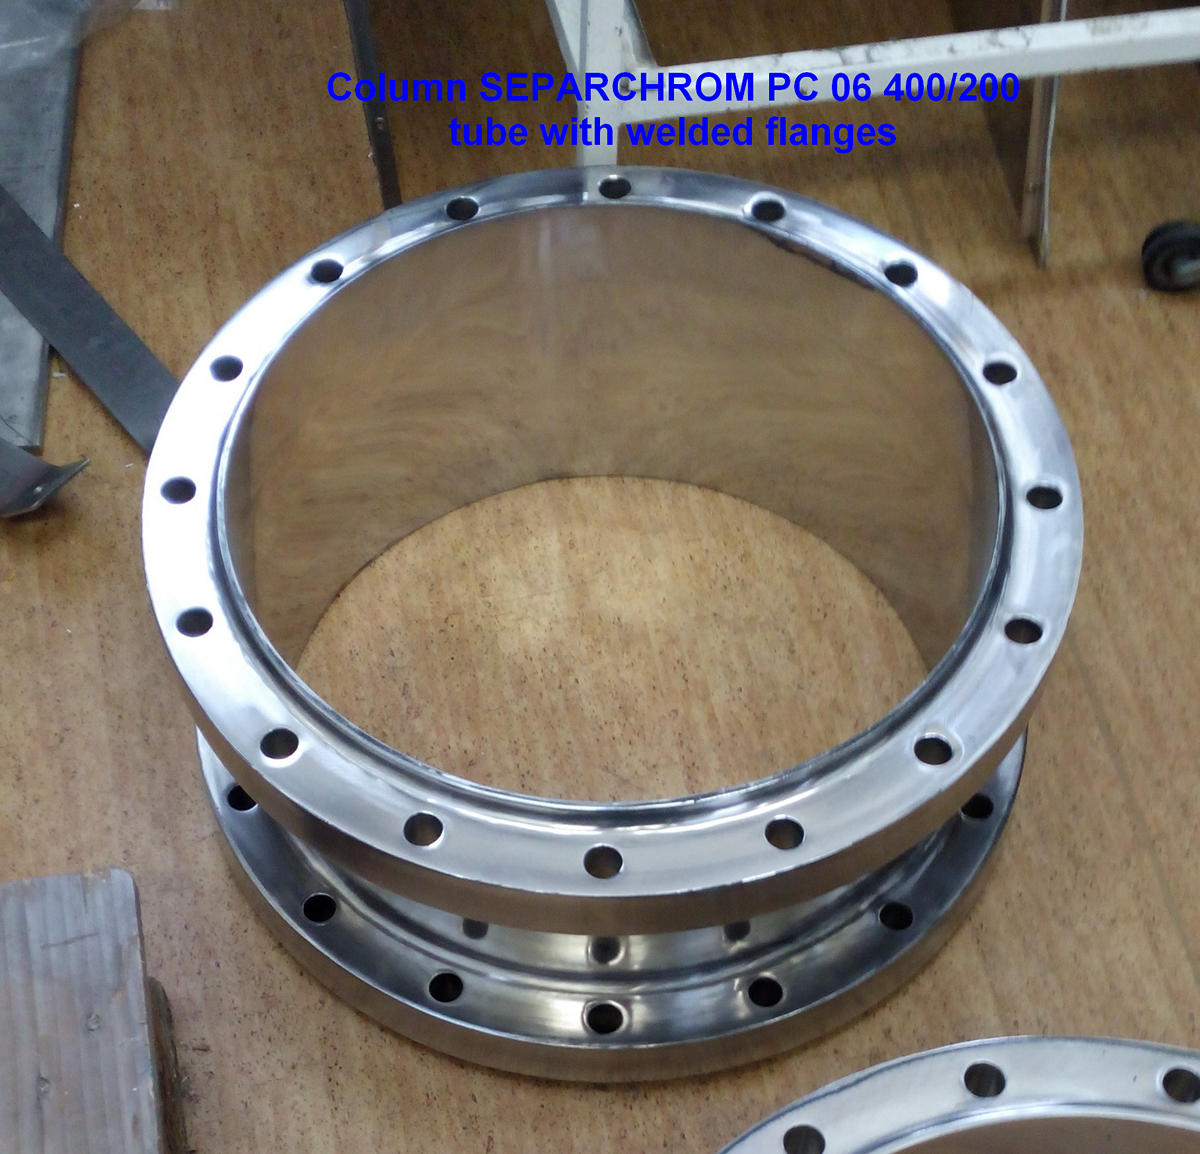 SEPARCHROM PC06 400/200 TUBE WITH WELDED FLANGES